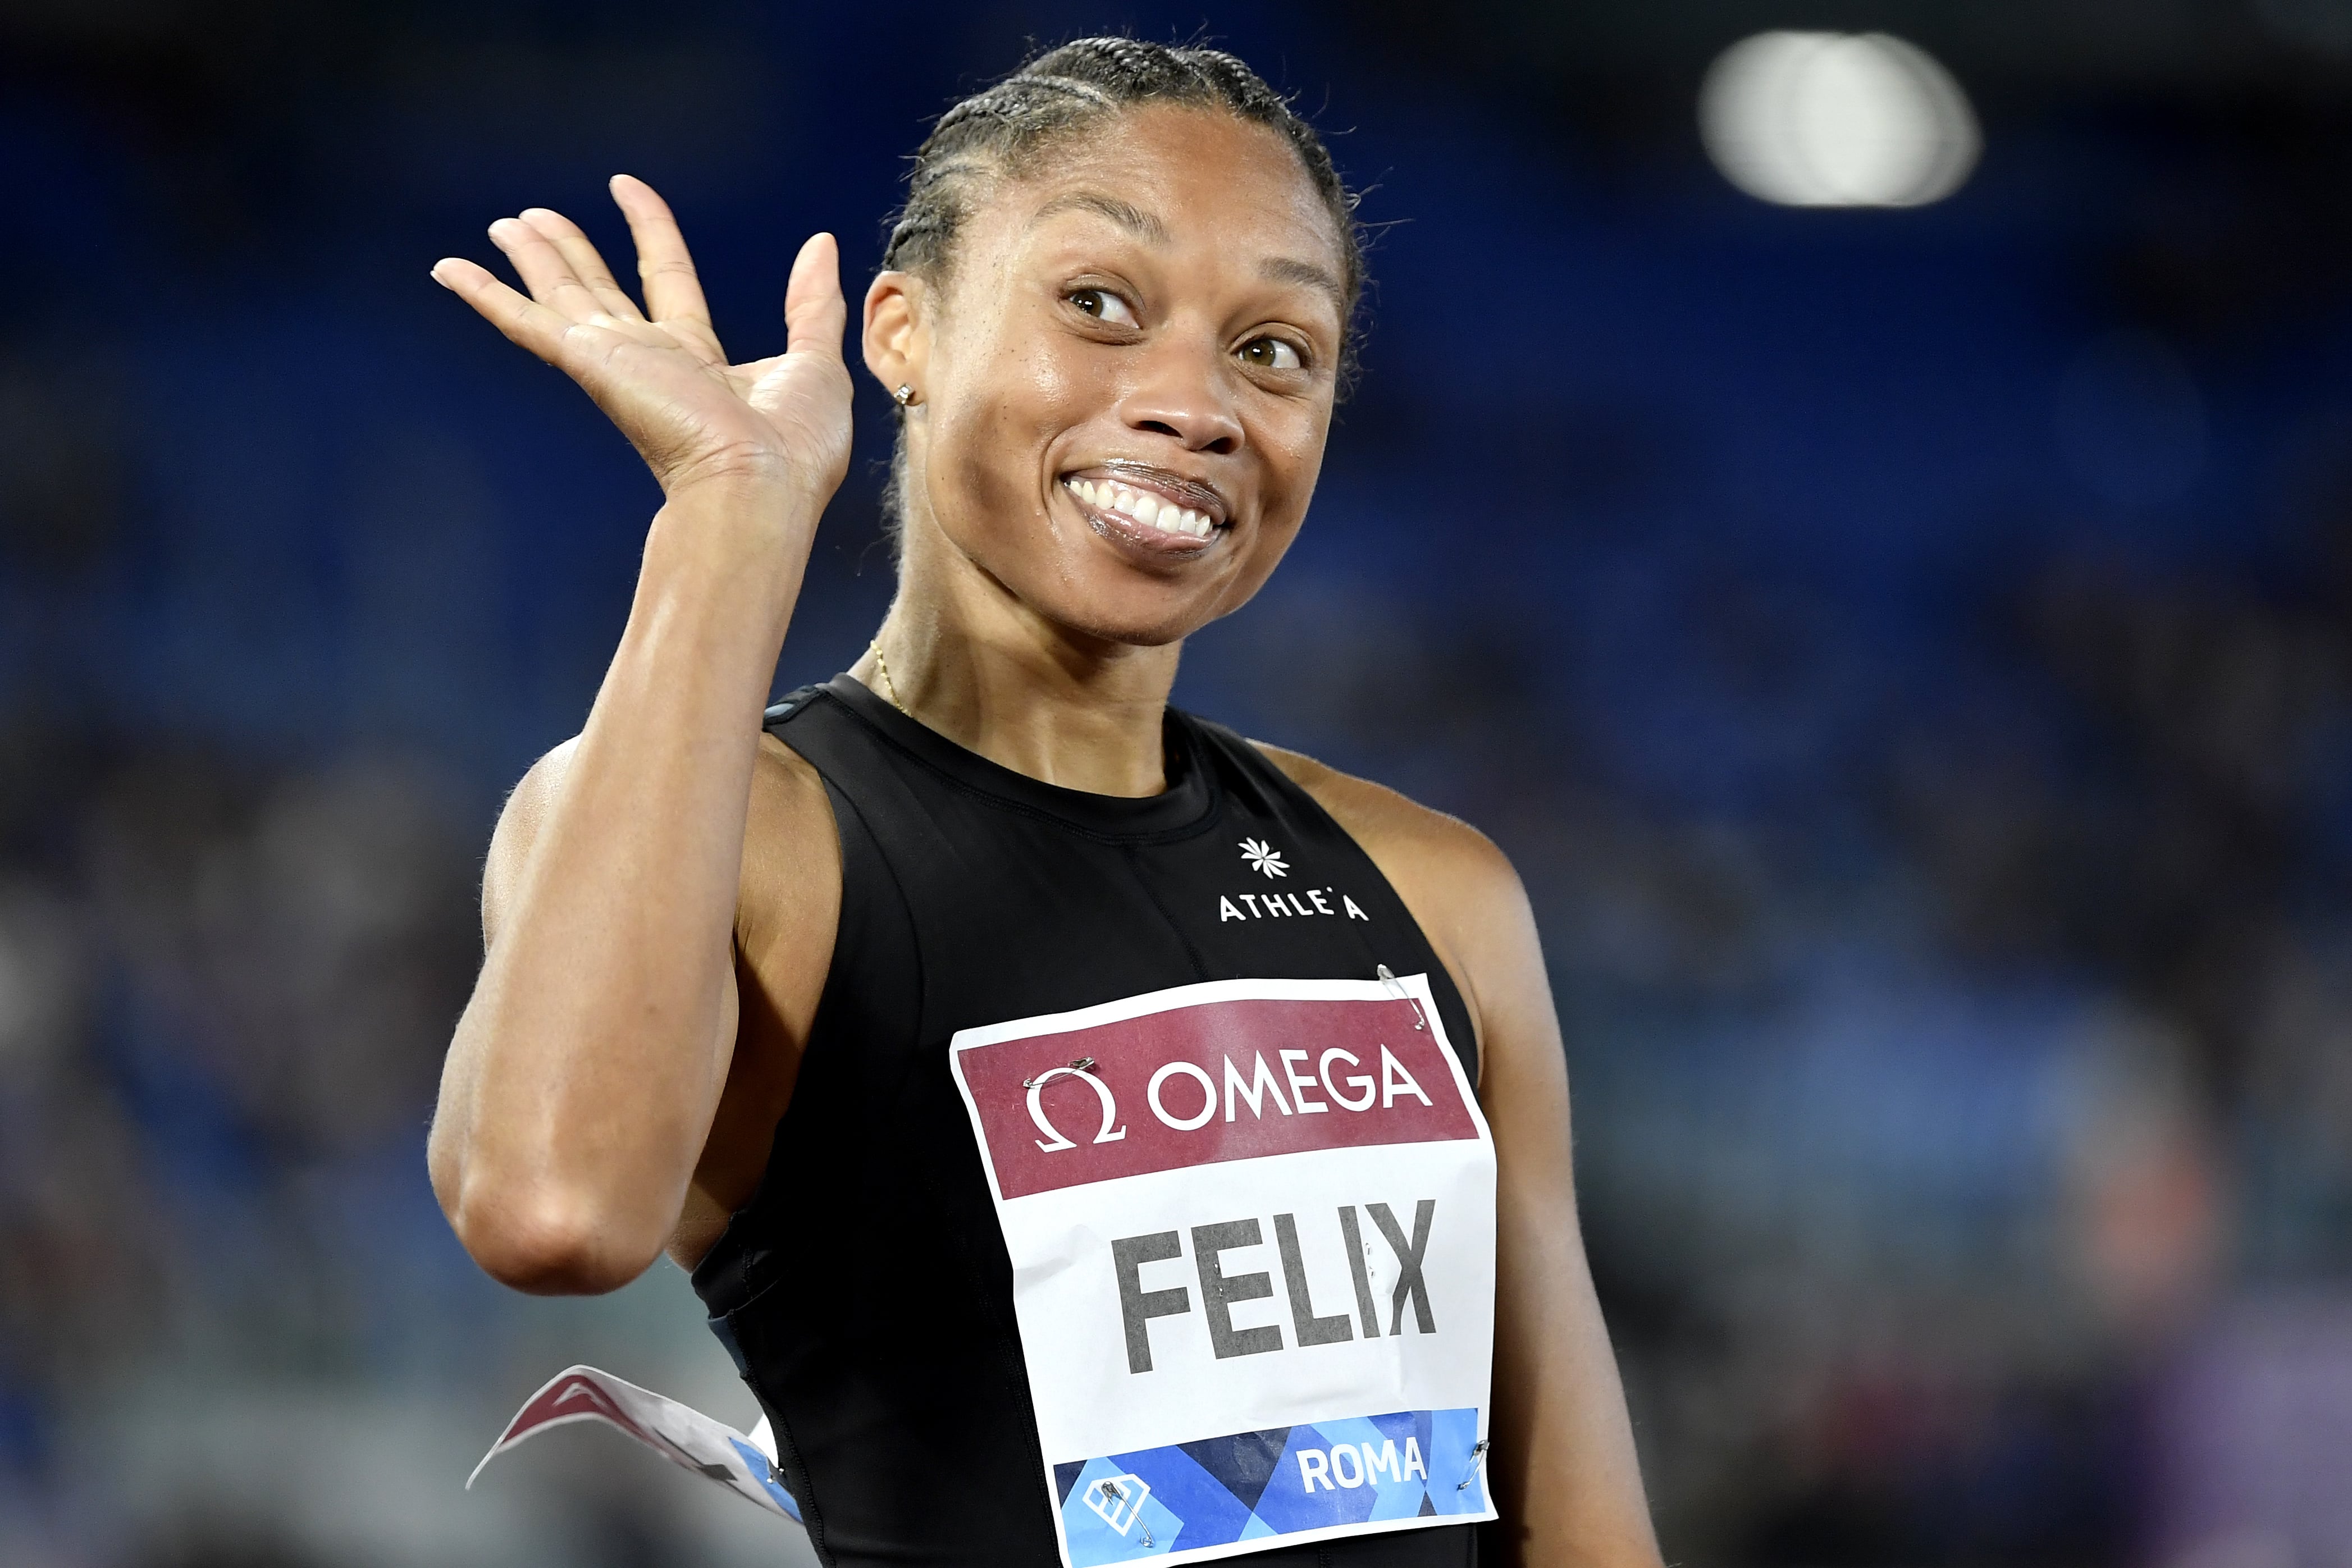 Allyson Felix Risked Everything By Speaking Out. She's Not